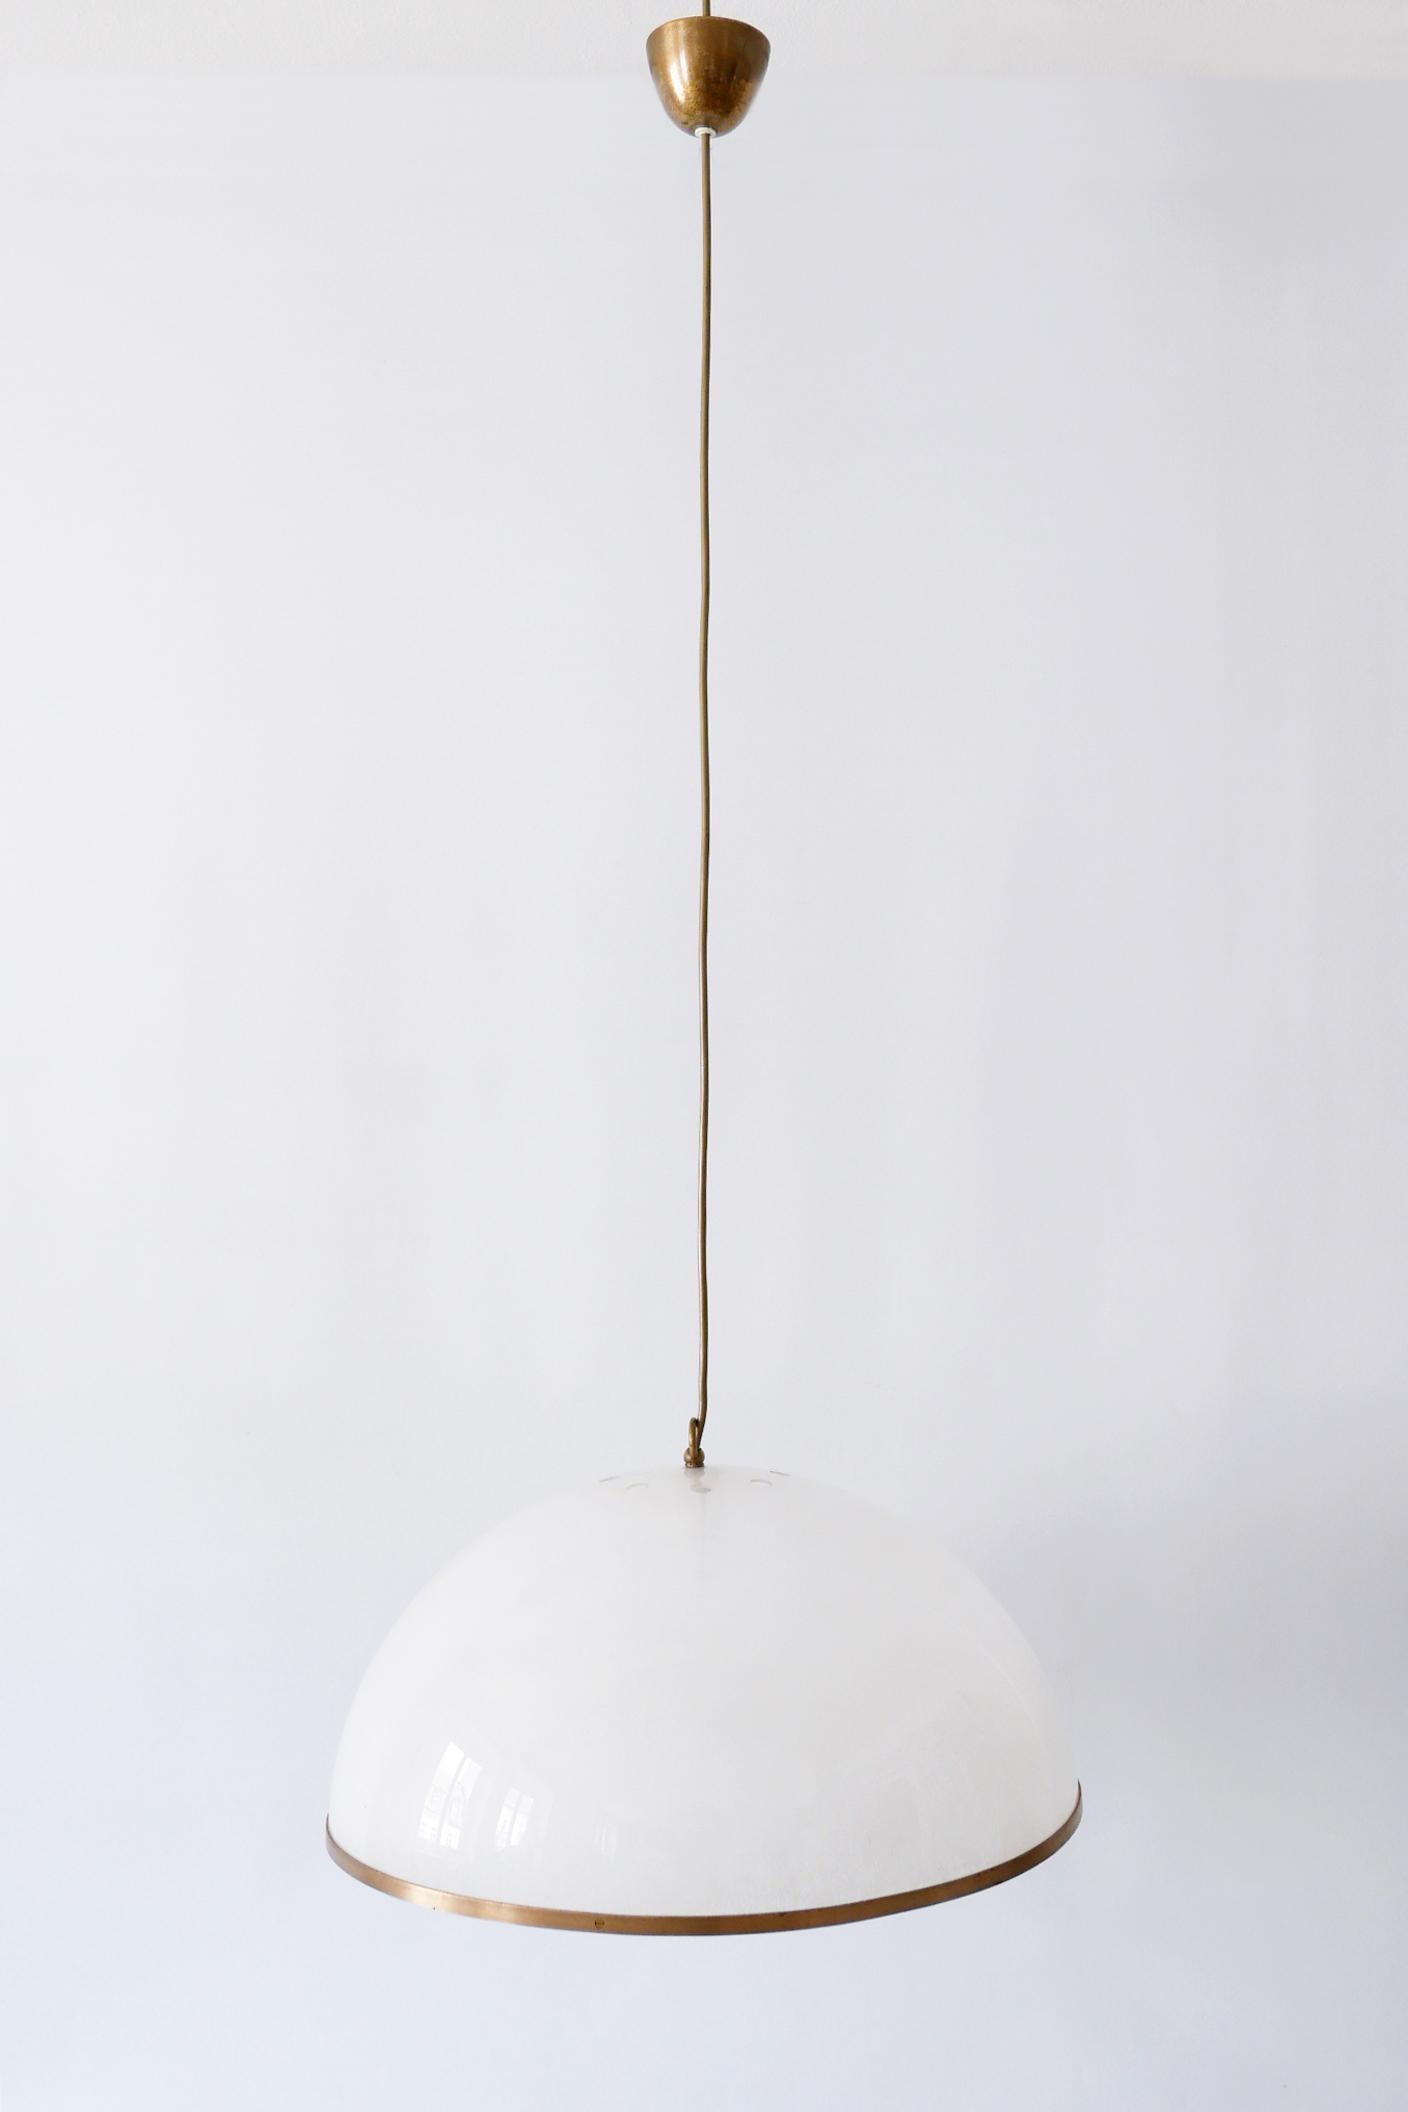 Elegant Mid-Century Modern Textured Lucite Pendant Lamp or Hanging Light, 1970s In Good Condition For Sale In Munich, DE